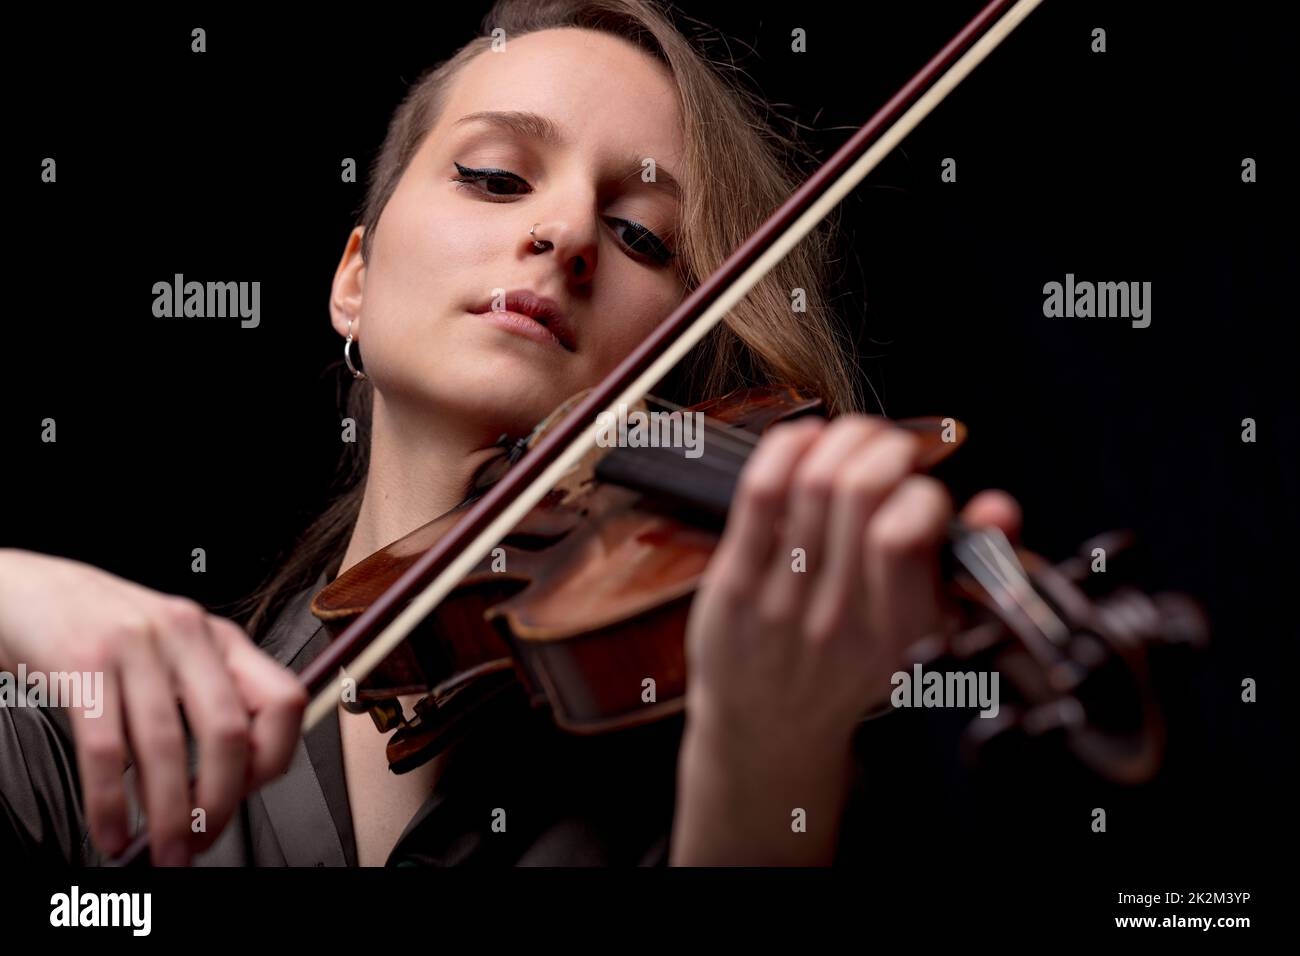 serious pretty woman playing violin on black Stock Photo